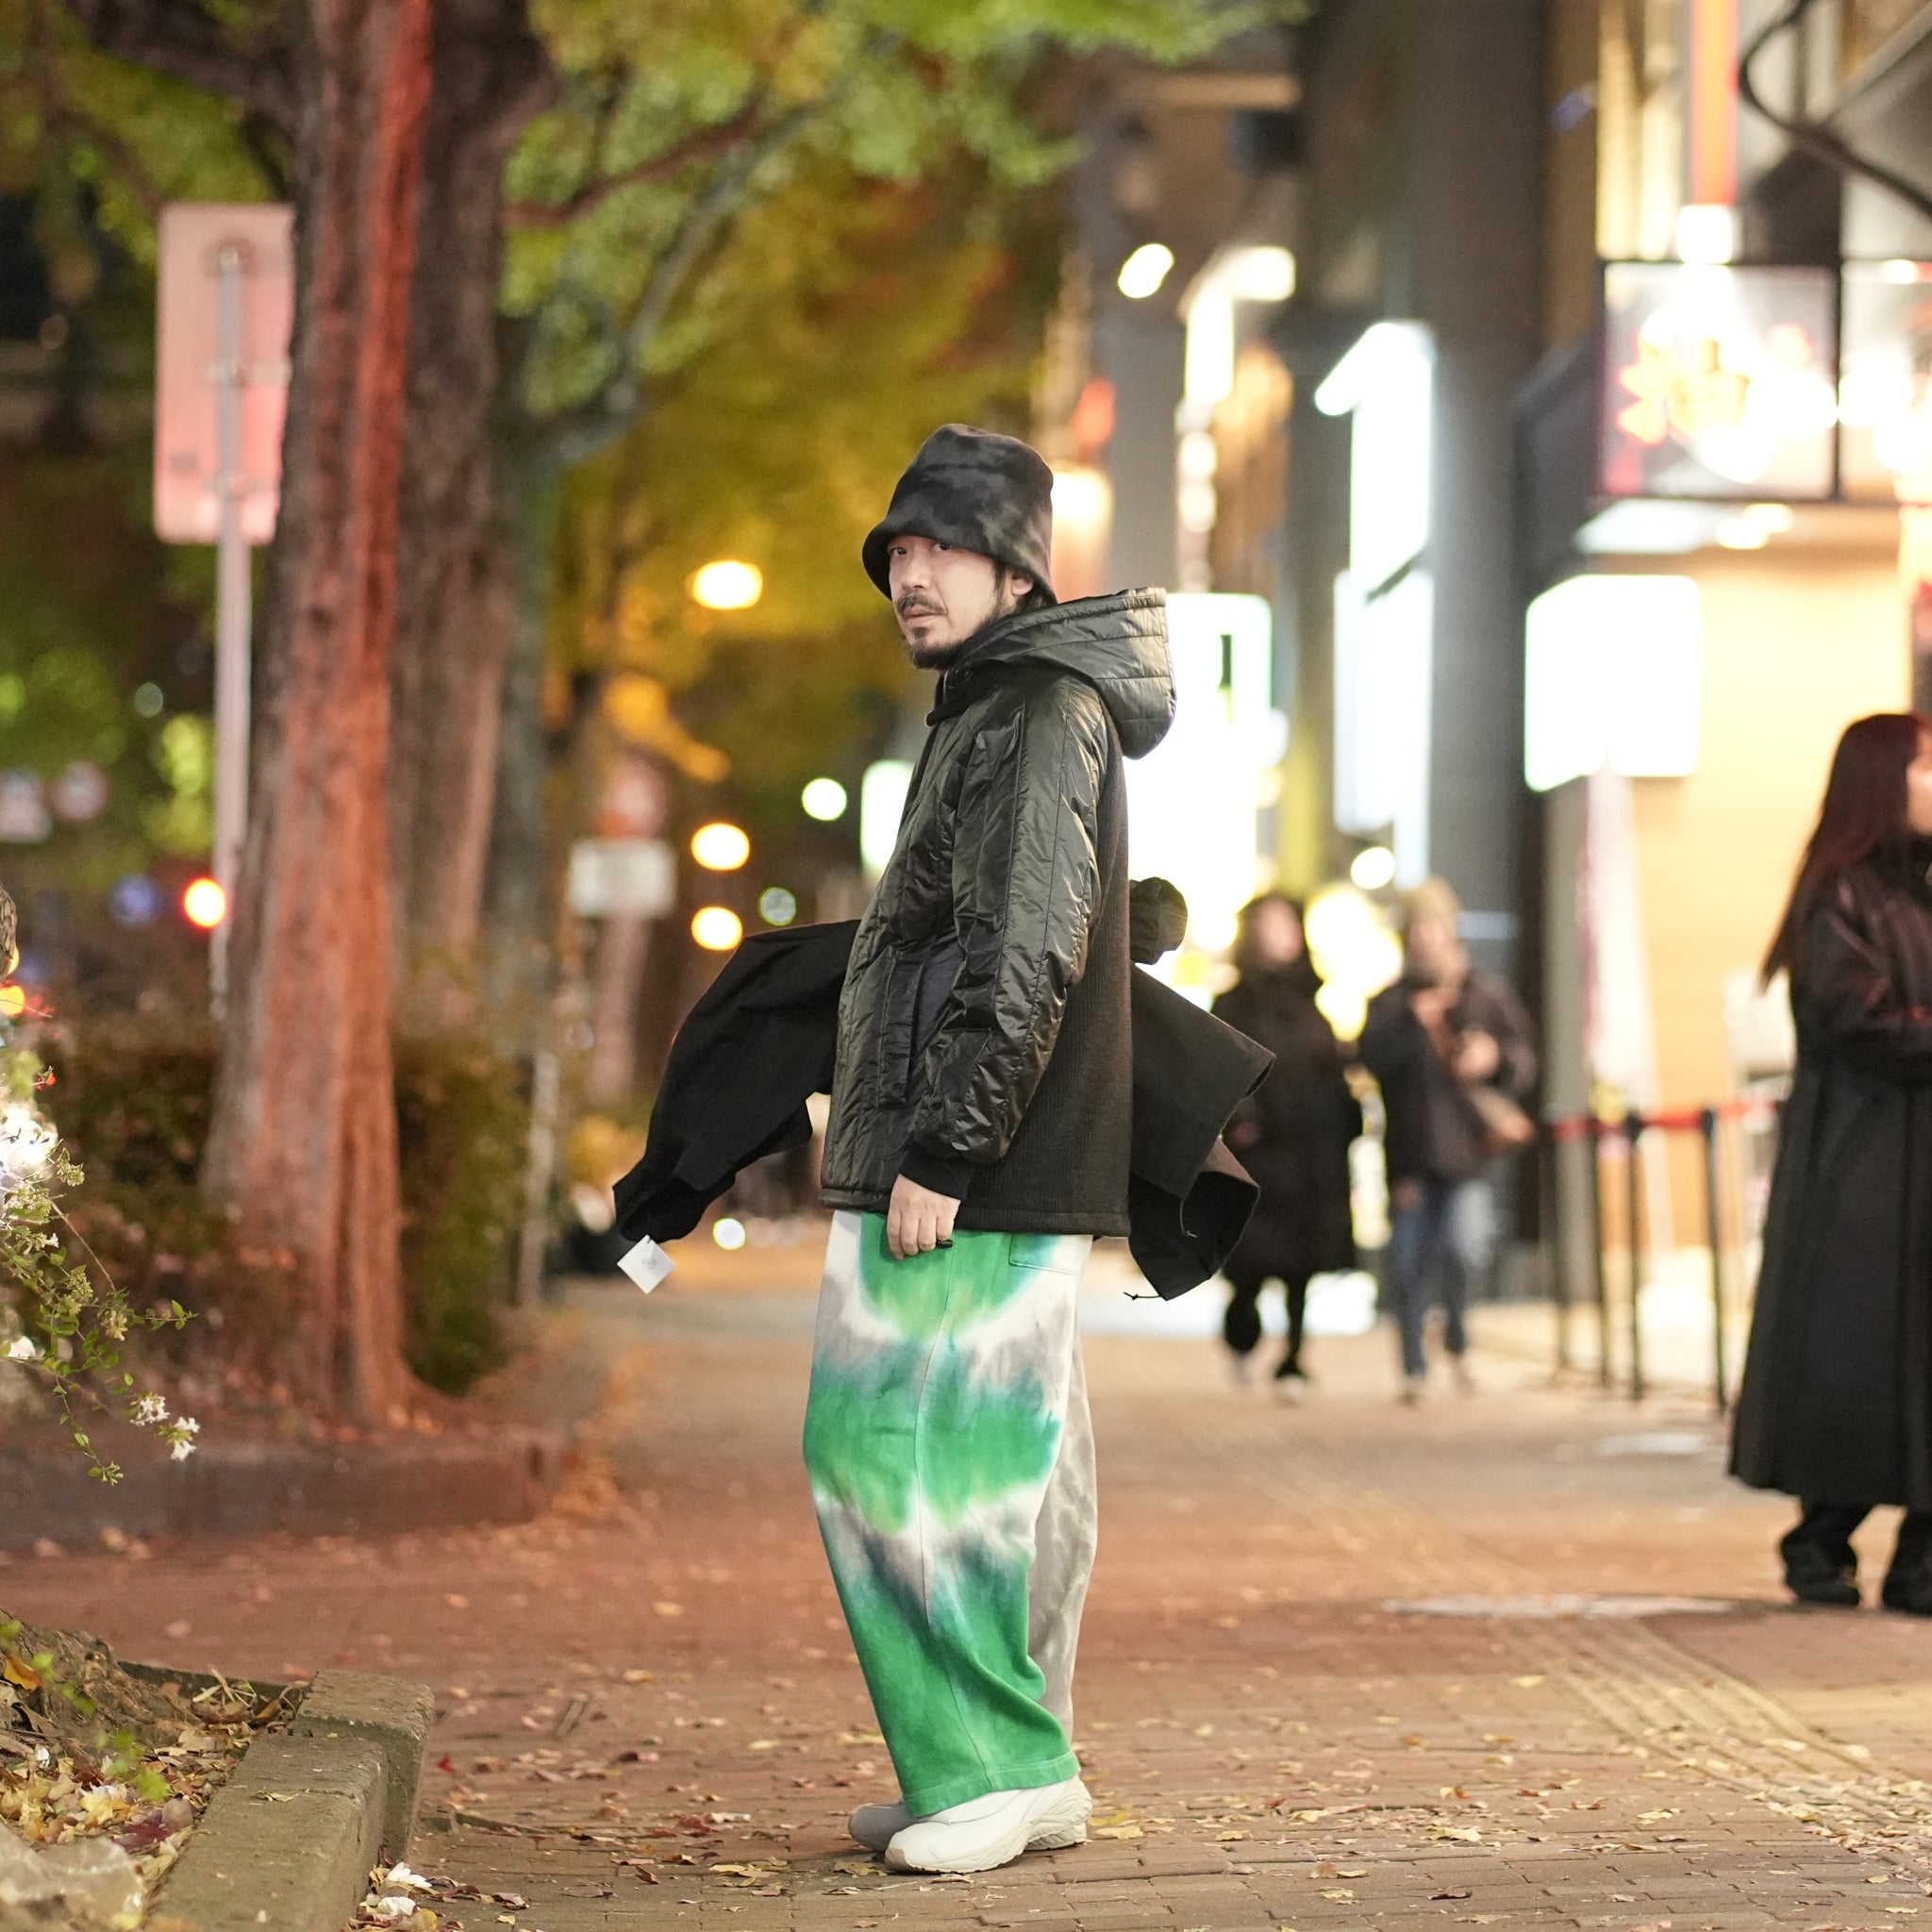 Name:Tiedye Pile Pants | Color:Mix/Coffee【AMBERGLEAM_アンバーグリーム】| No:1144131112